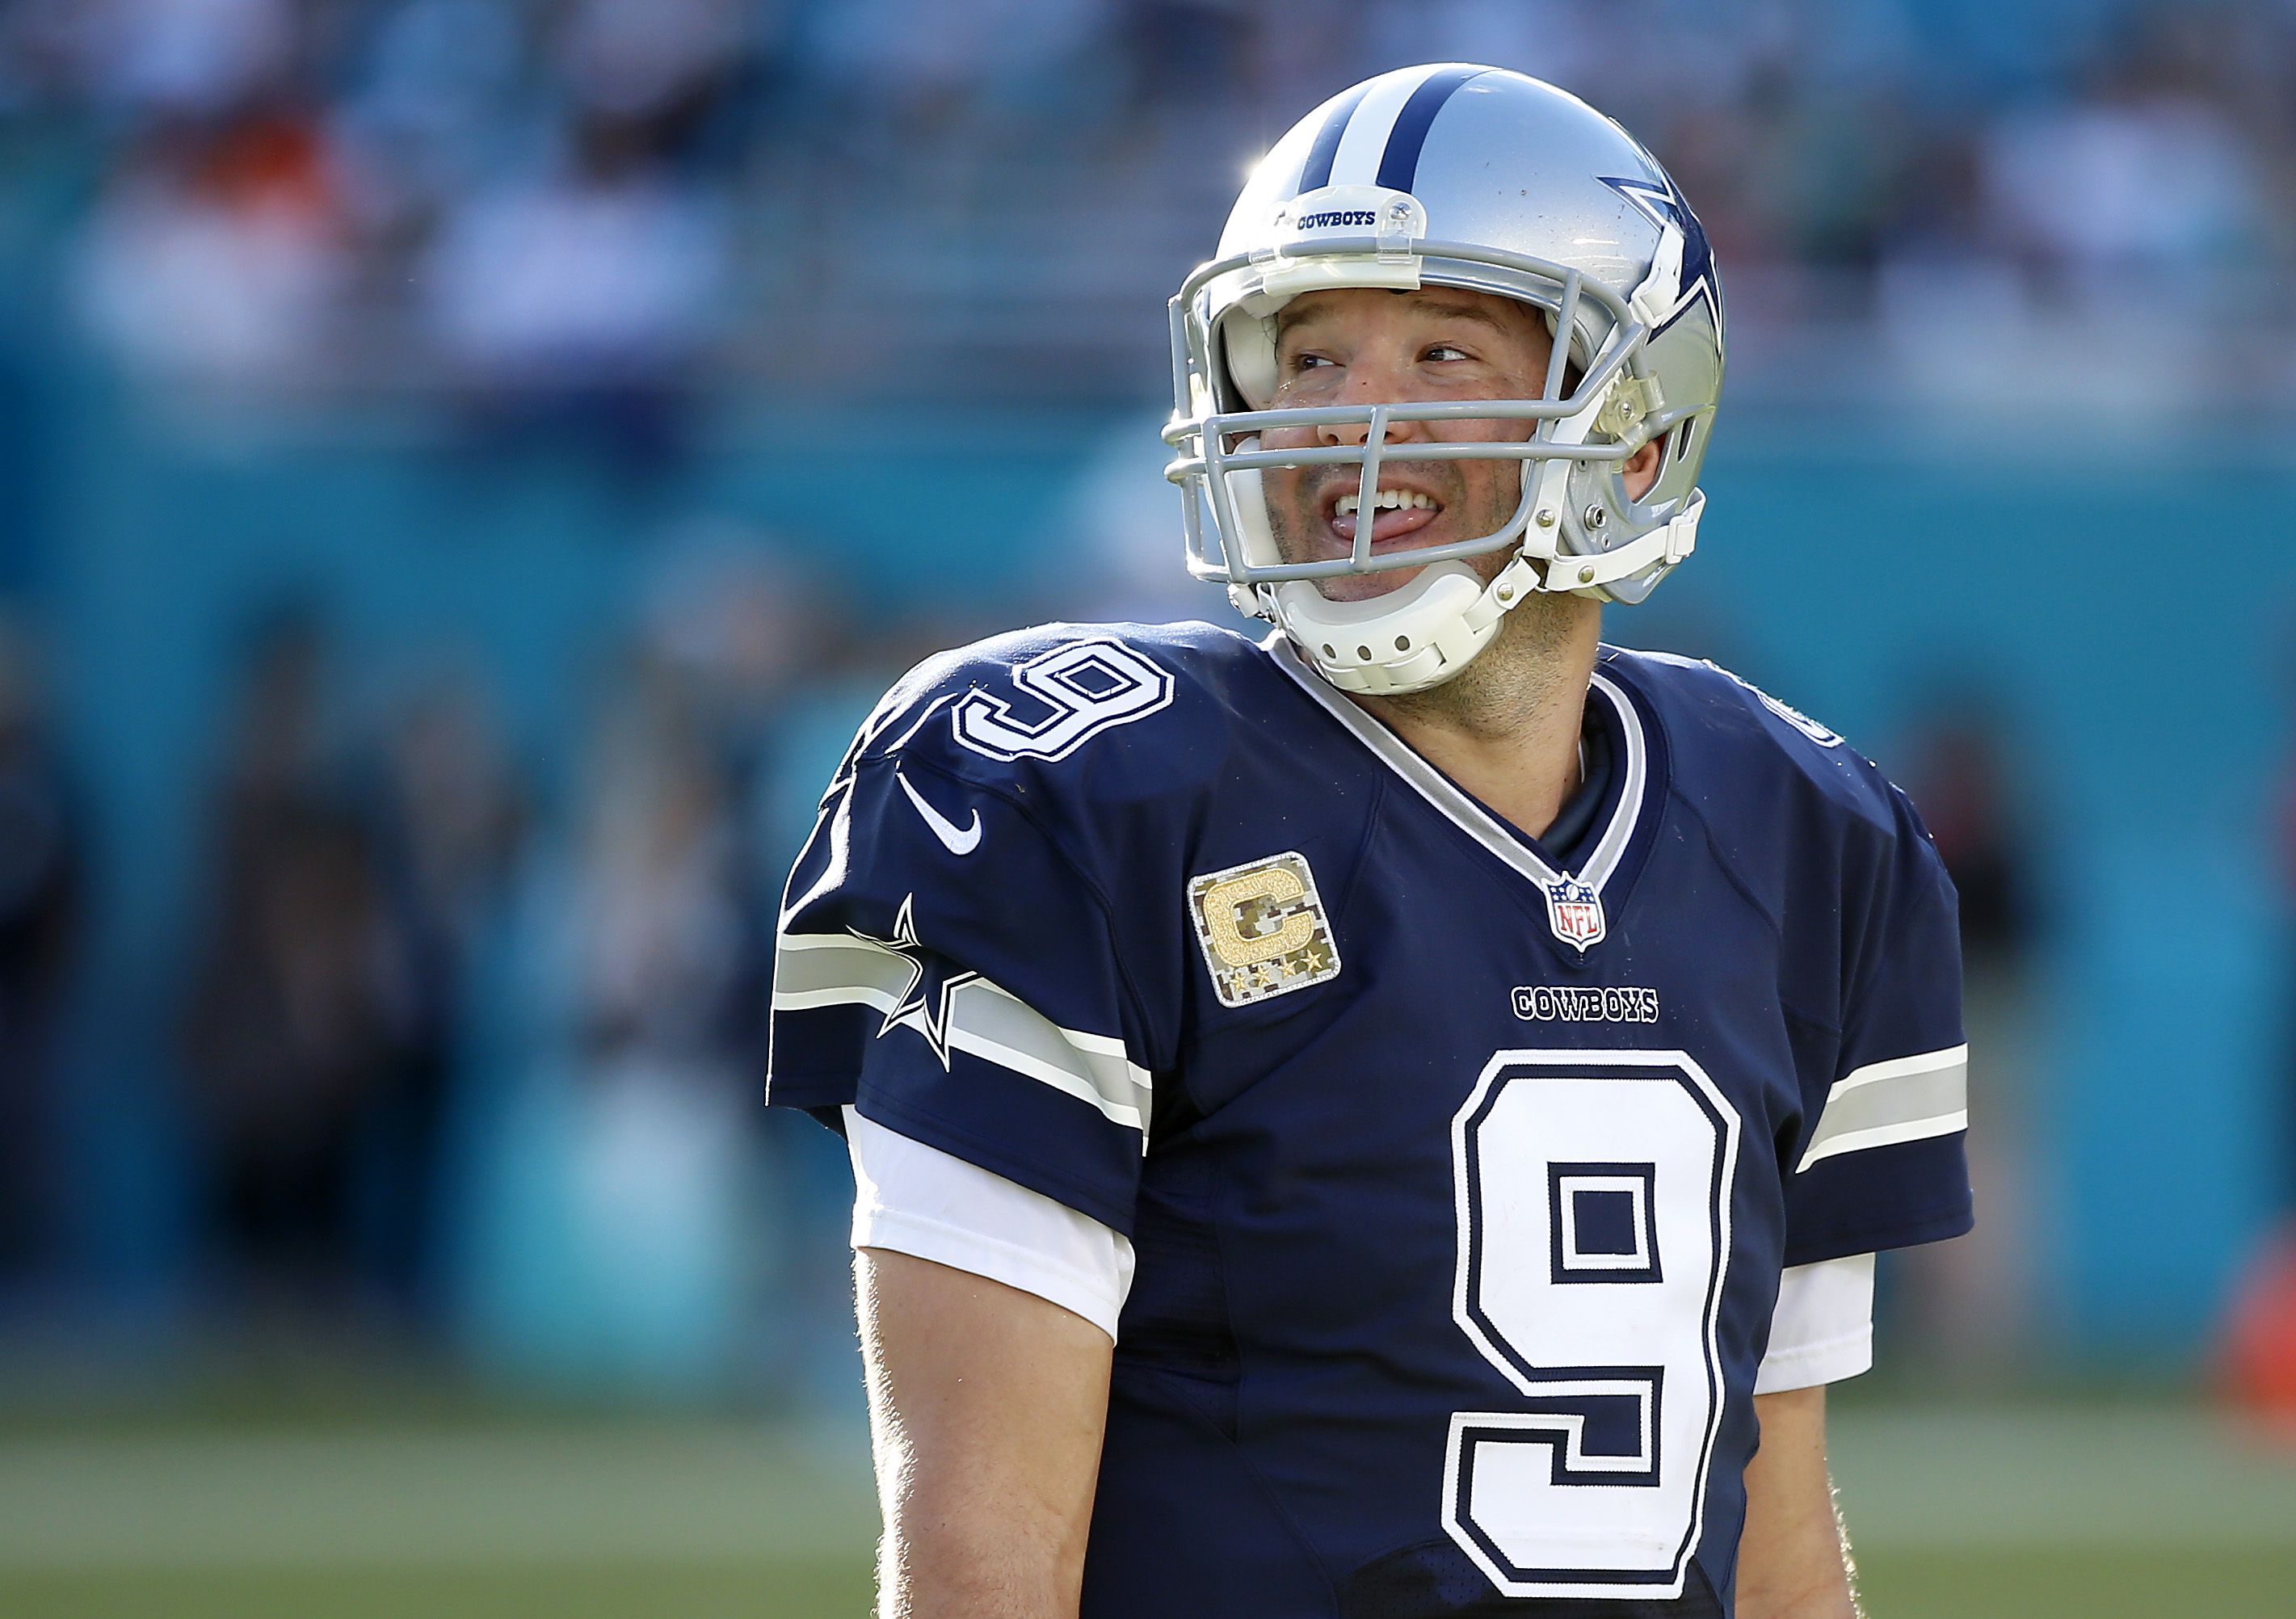 Why CBS handed Tony Romo the keys to the penthouse so quickly